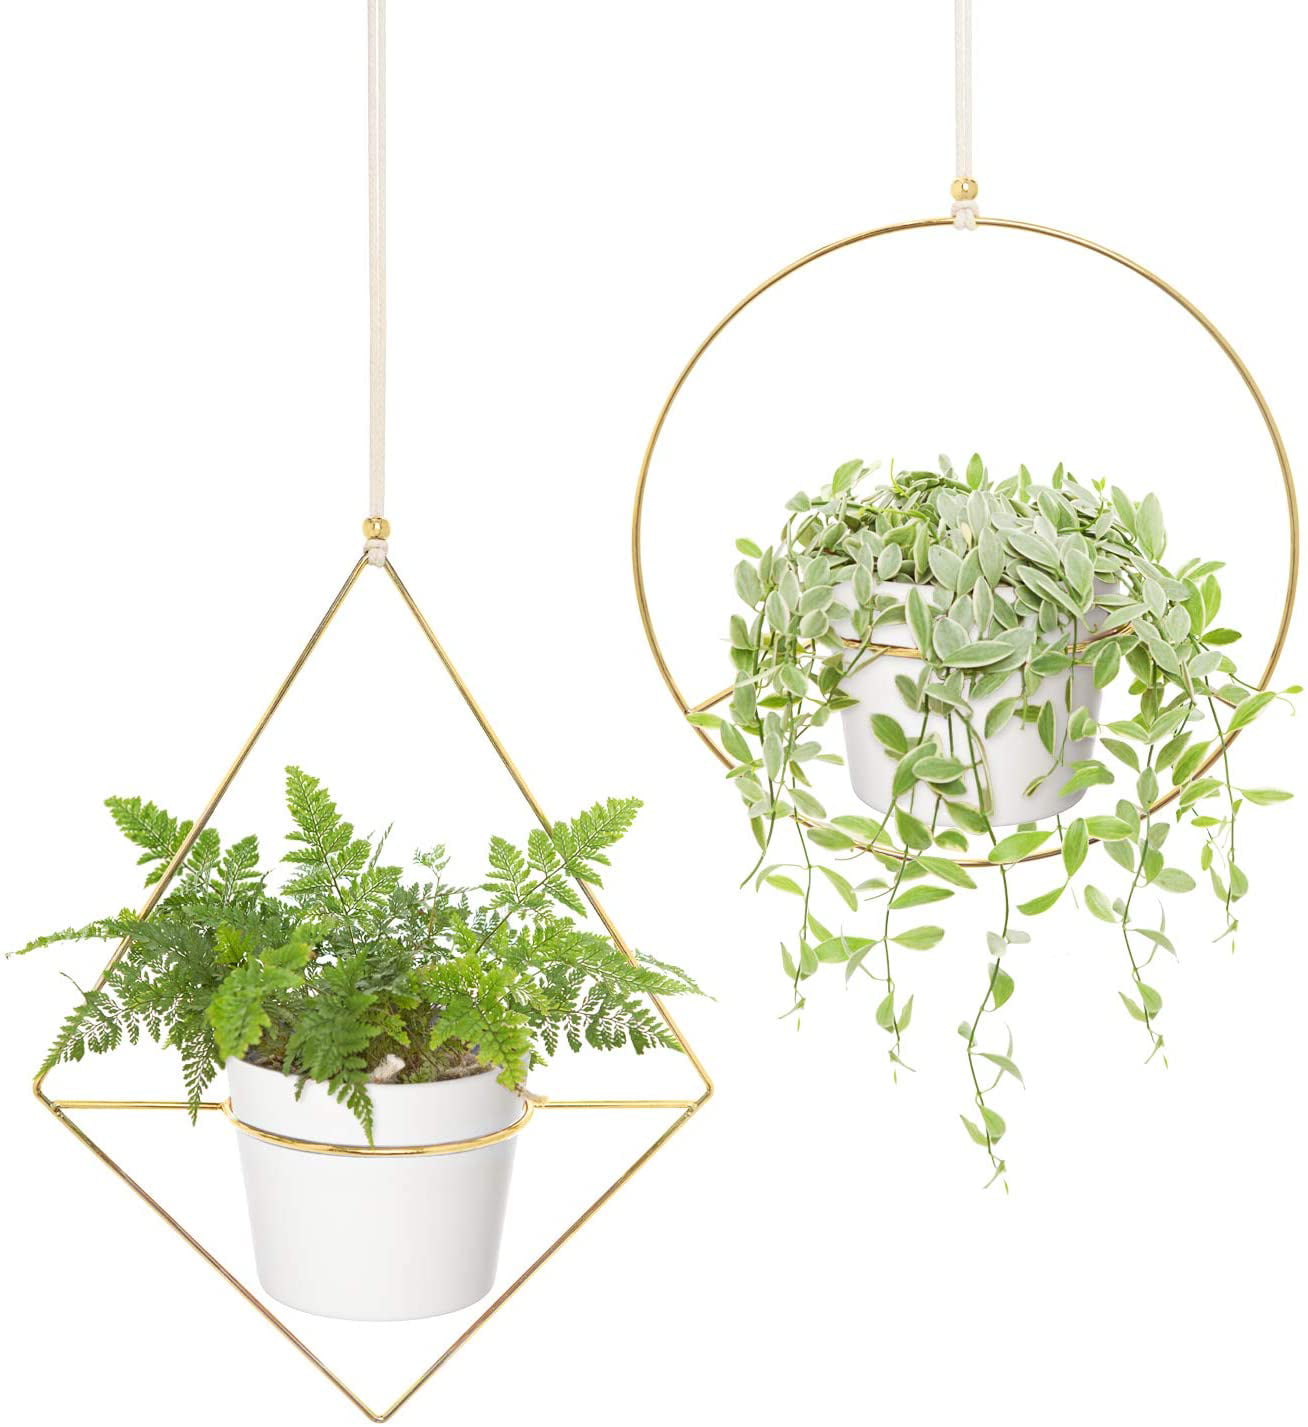 Finderomend Boho Hanging Planter Set of 2 Metal Plant Hanger with Pots,Mid Century Flower Pot Plant Holder in Triangle and Oval Shape Simple Modern Wall and Ceiling Haning Planter for Home Garden